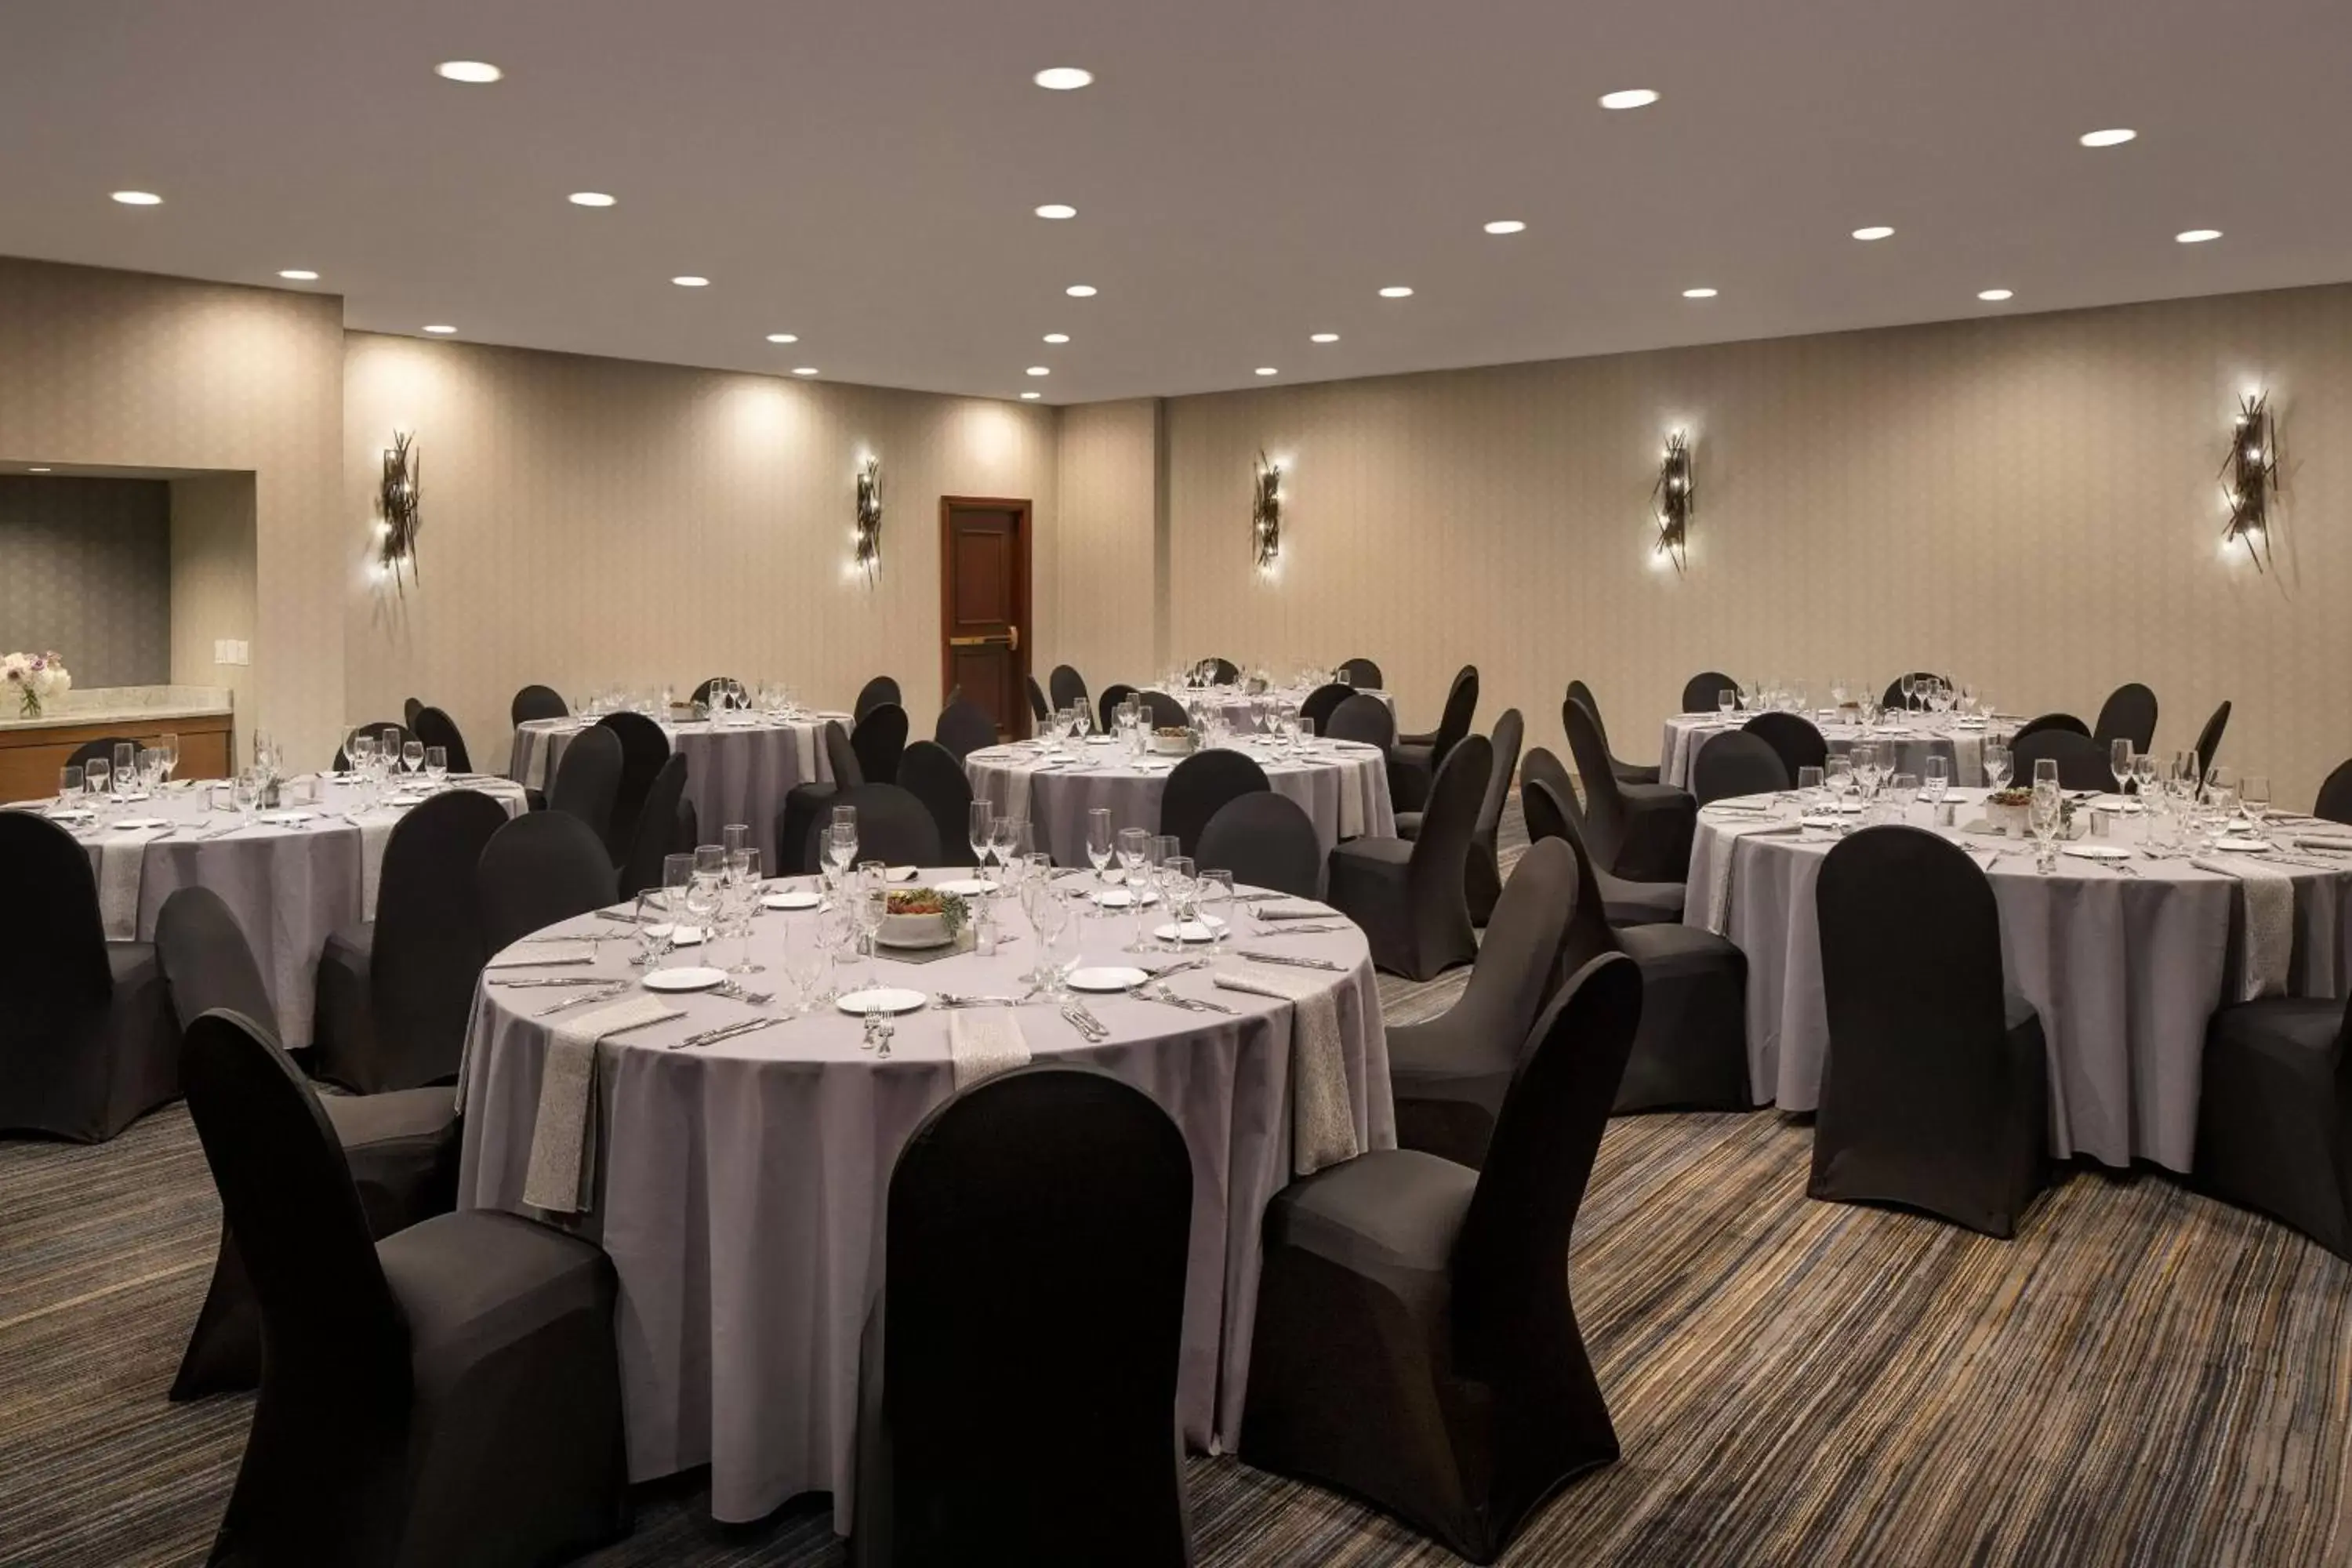 Meeting/conference room, Banquet Facilities in Cleveland Marriott East